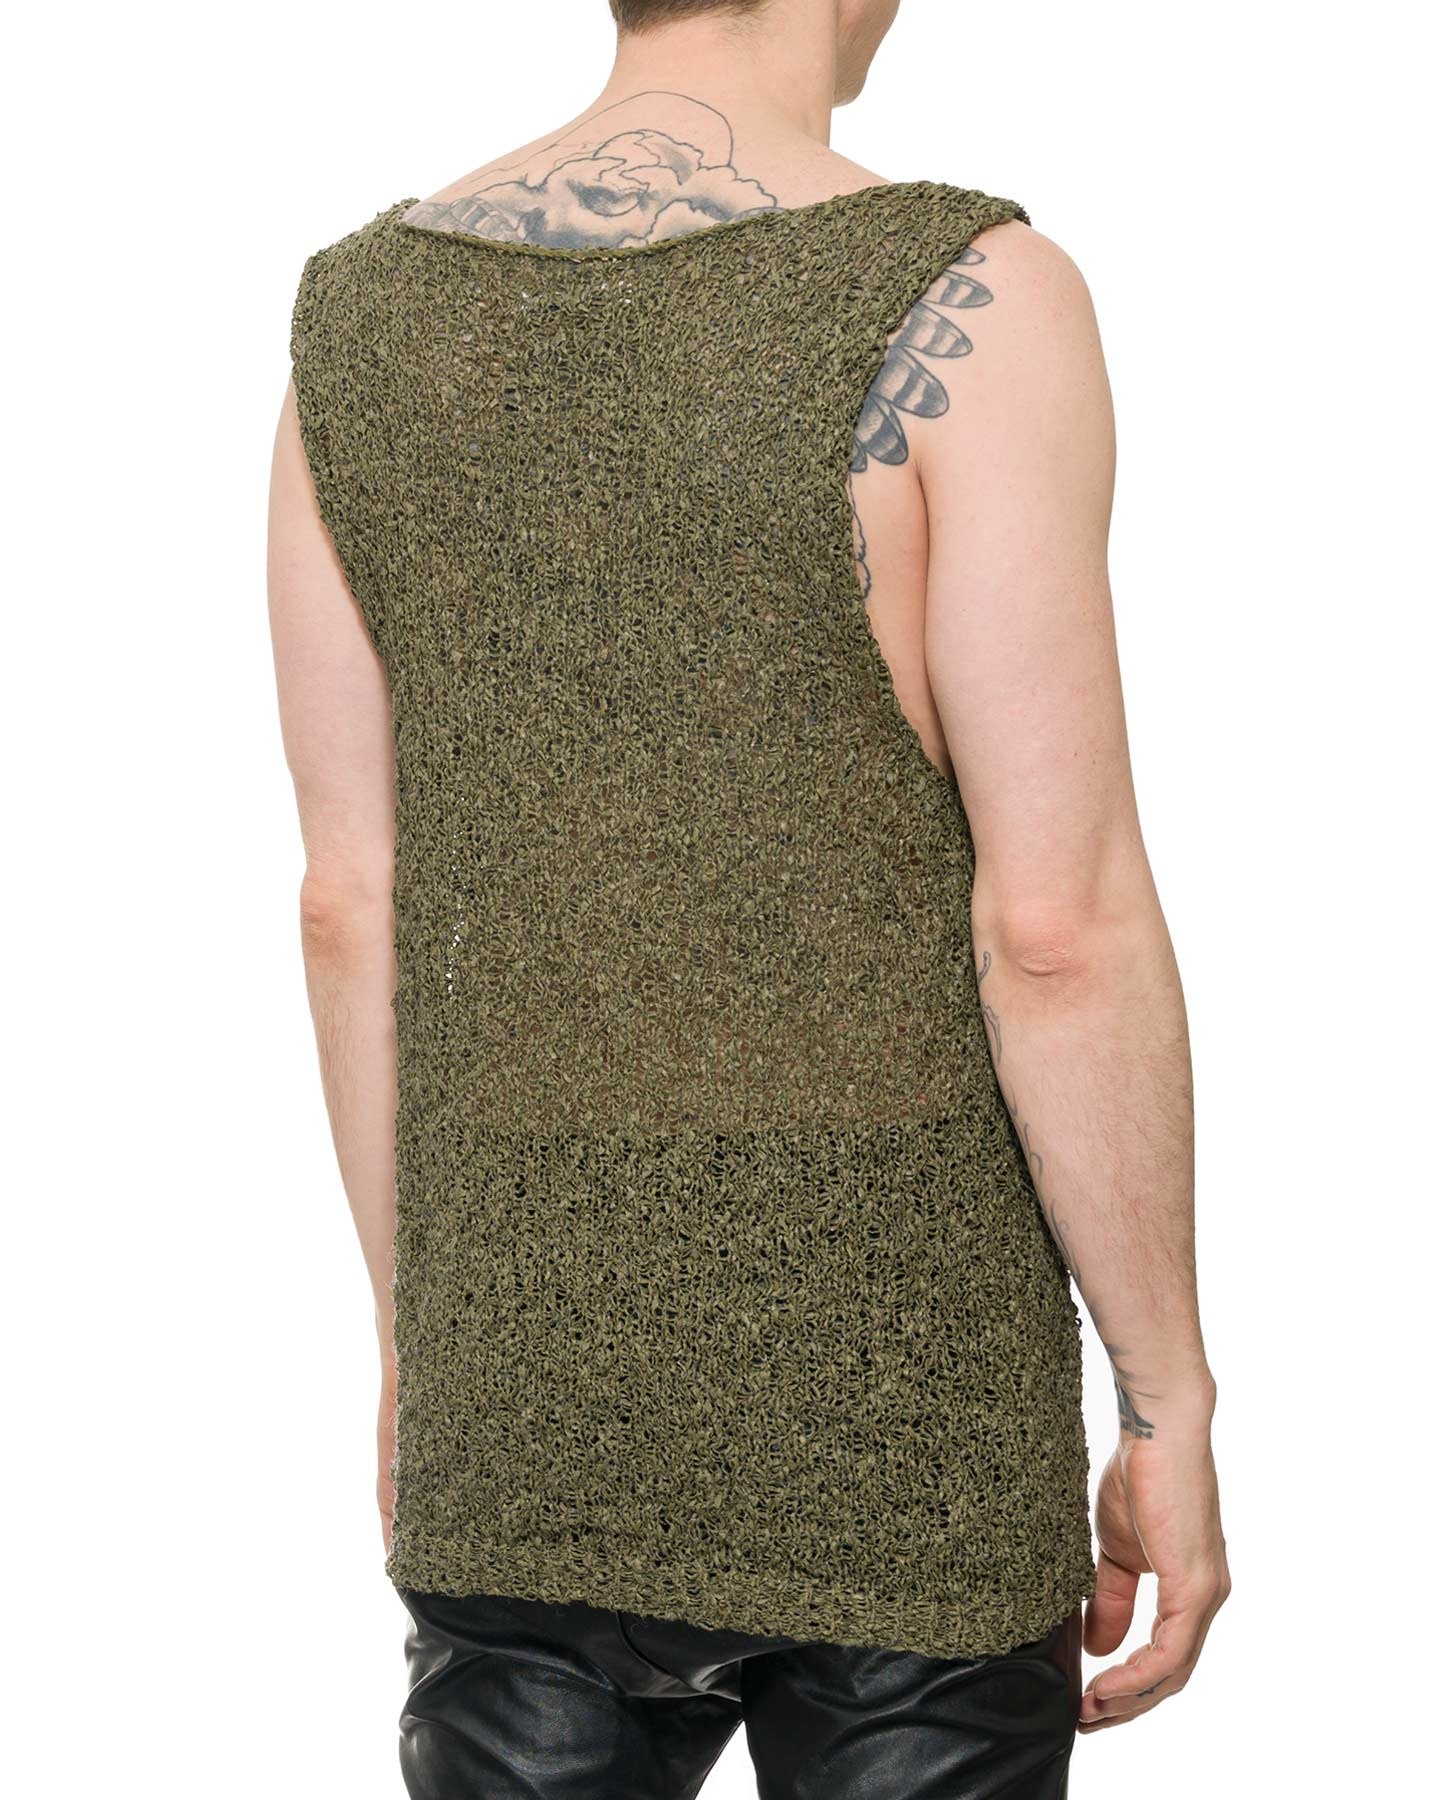 MEN'S TEXTURED HAND KNIT TANK TOP by NOSTRA SANTISSIMA - Shop Untitled NYC